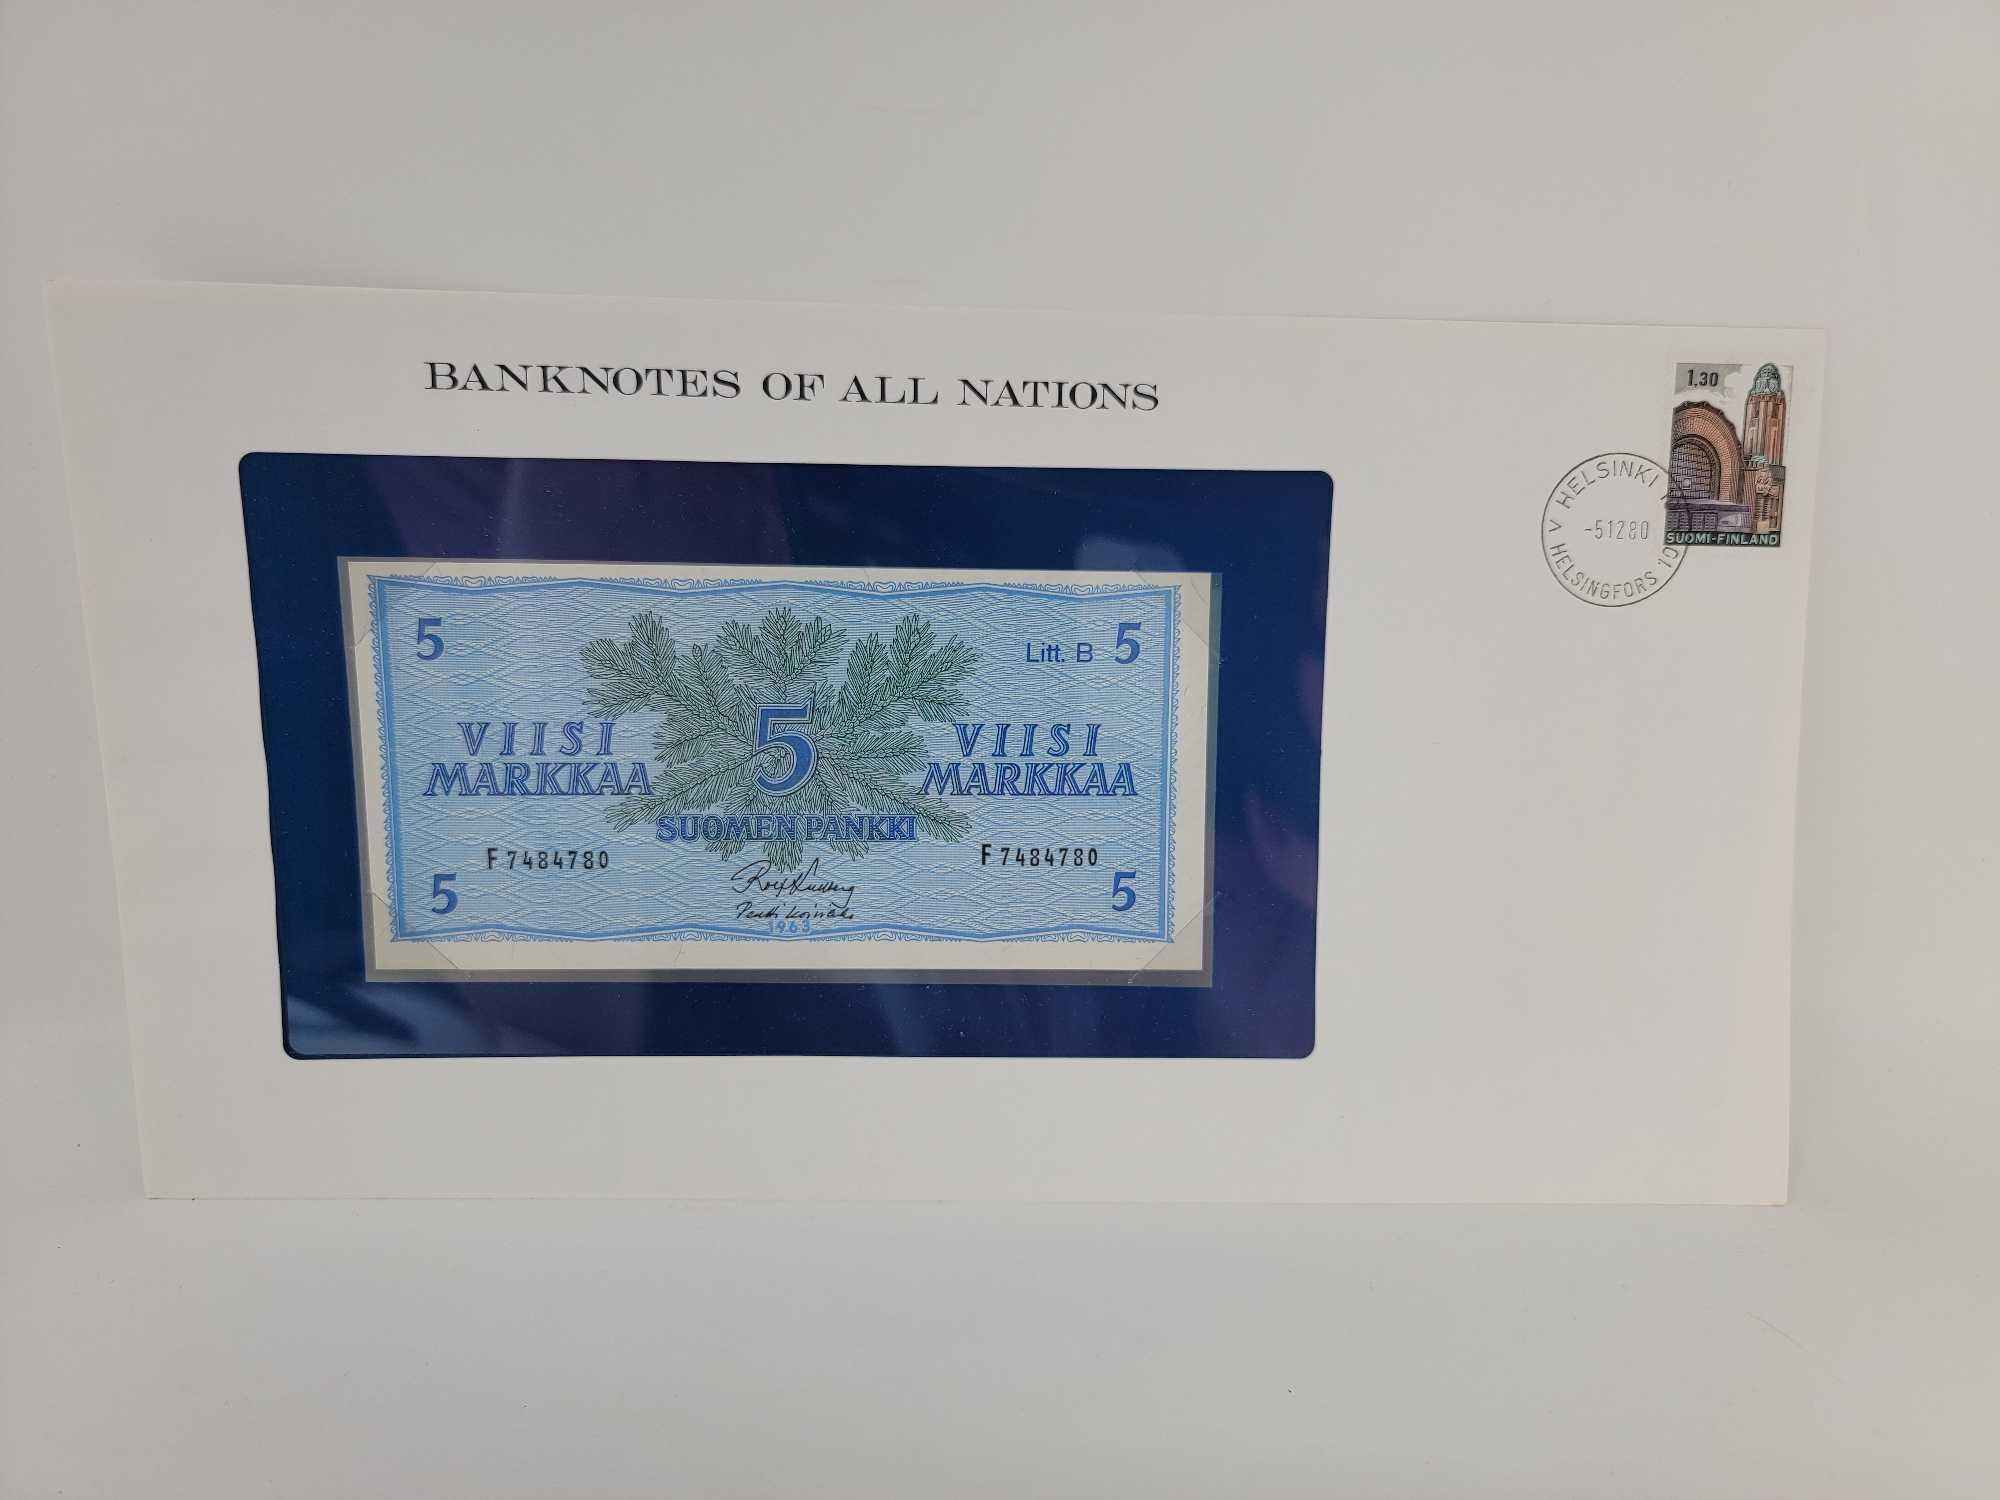 Collection of "Banknotes of All Nations" with Box and Informative Tab Dividers